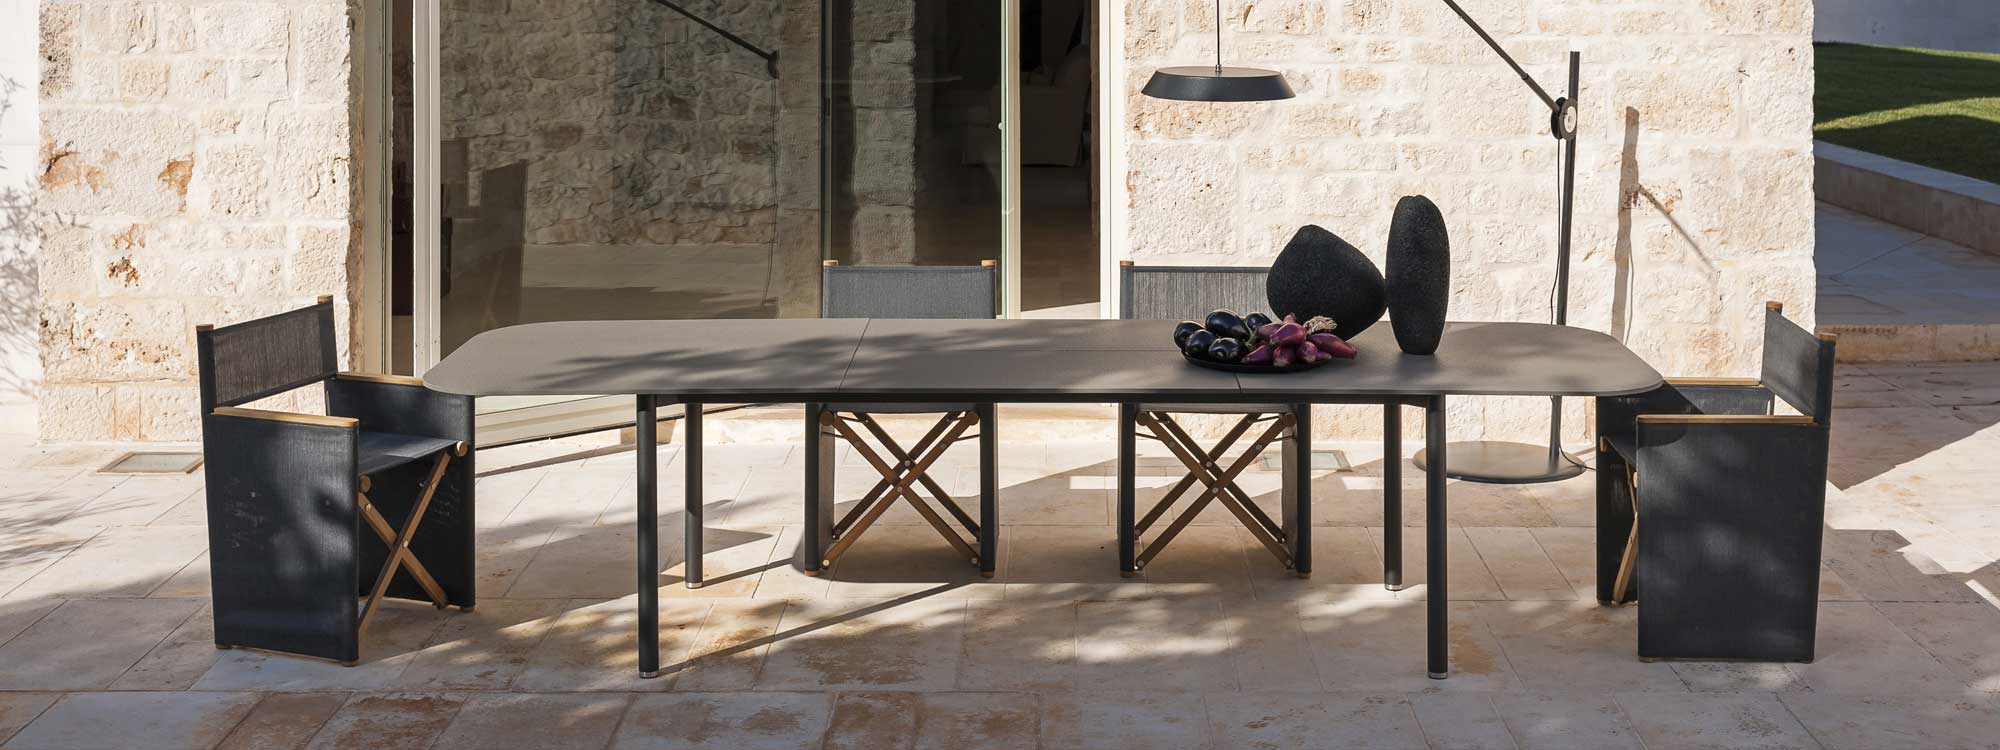 Image of Orson modern outdoor director chairs and Piper extending garden table by RODA